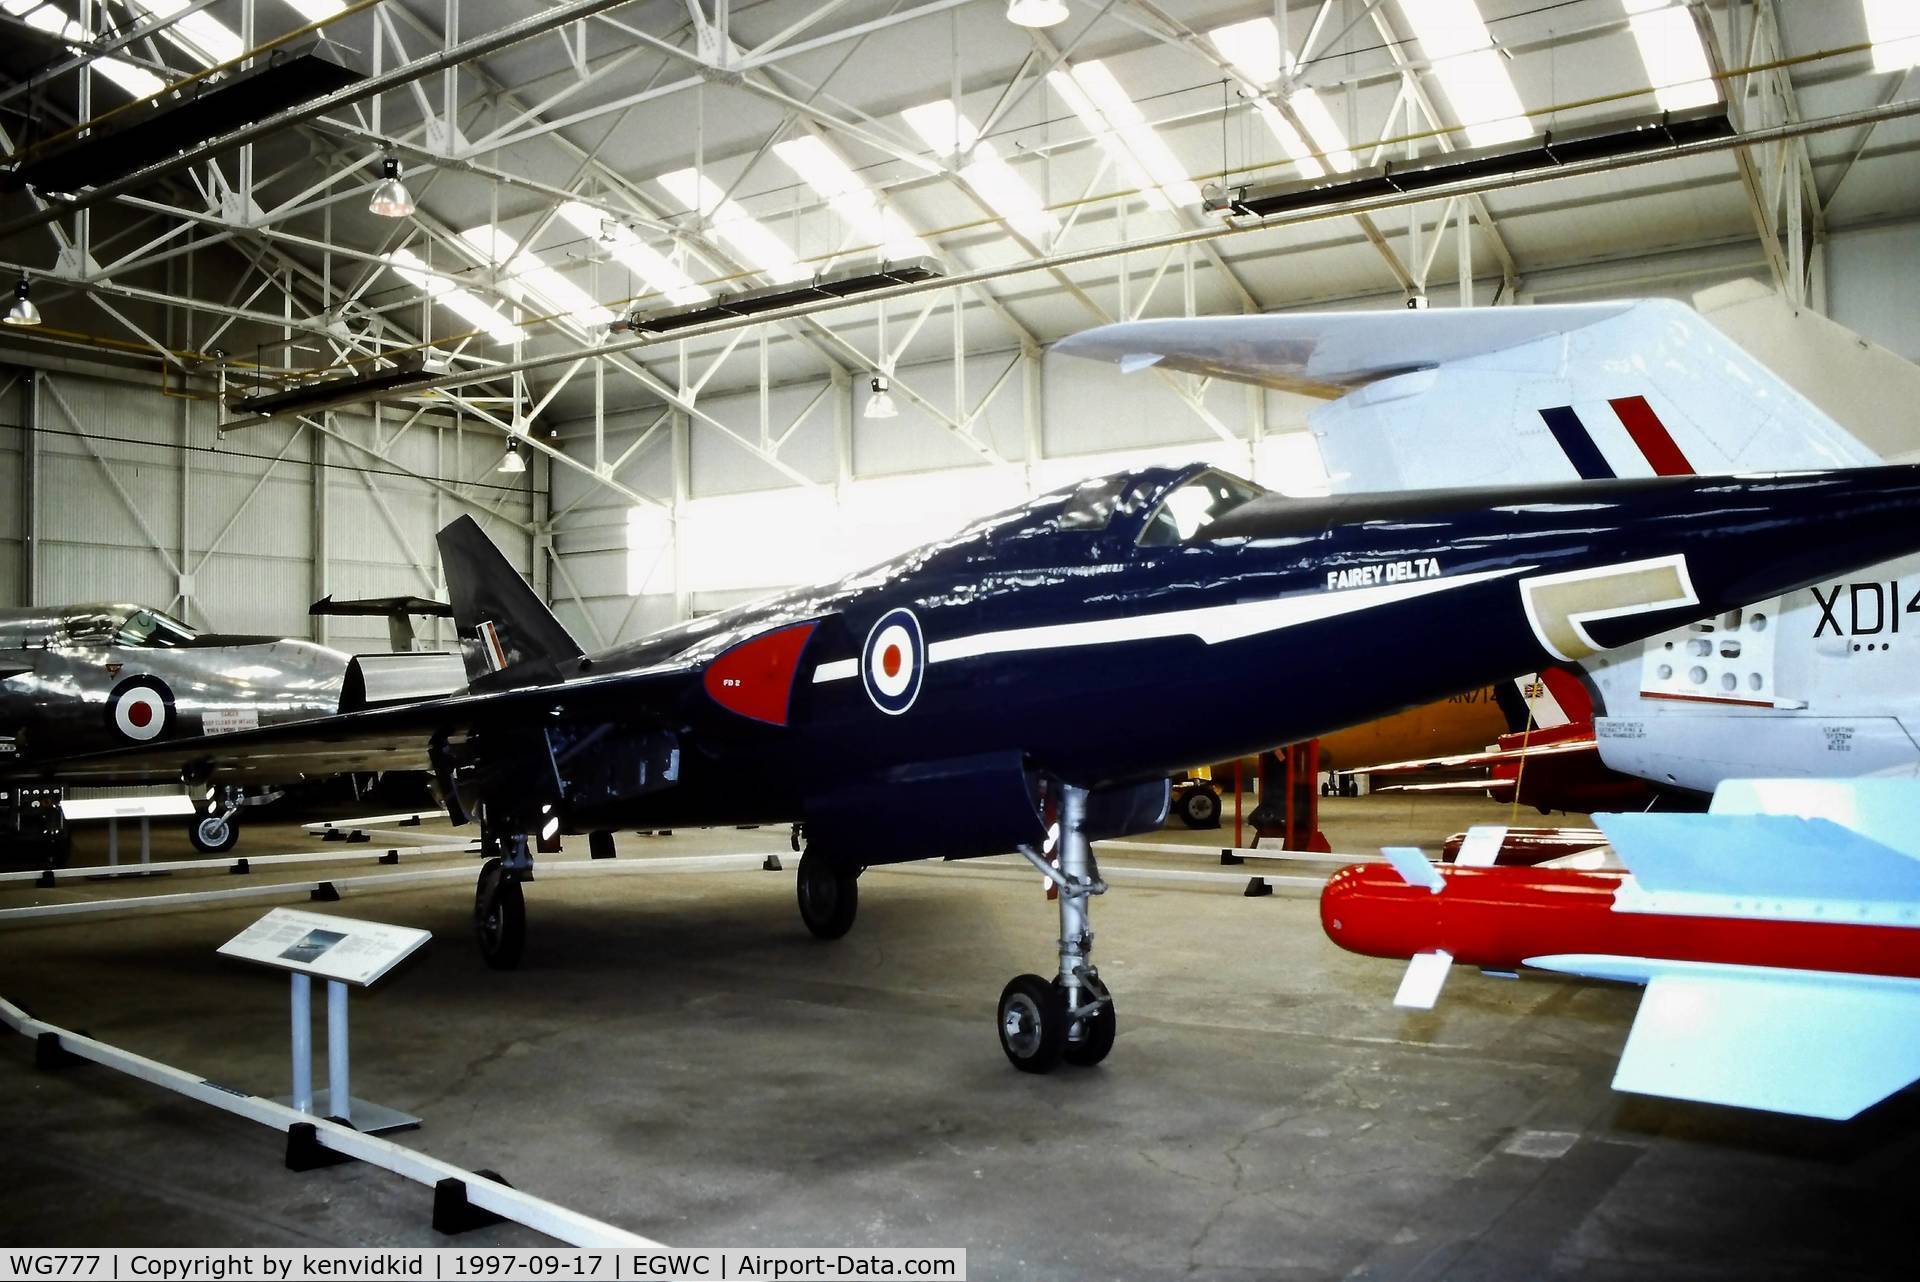 WG777, 1956 Fairey Delta FD2 C/N F9422, A visit to Cosford in 1997.